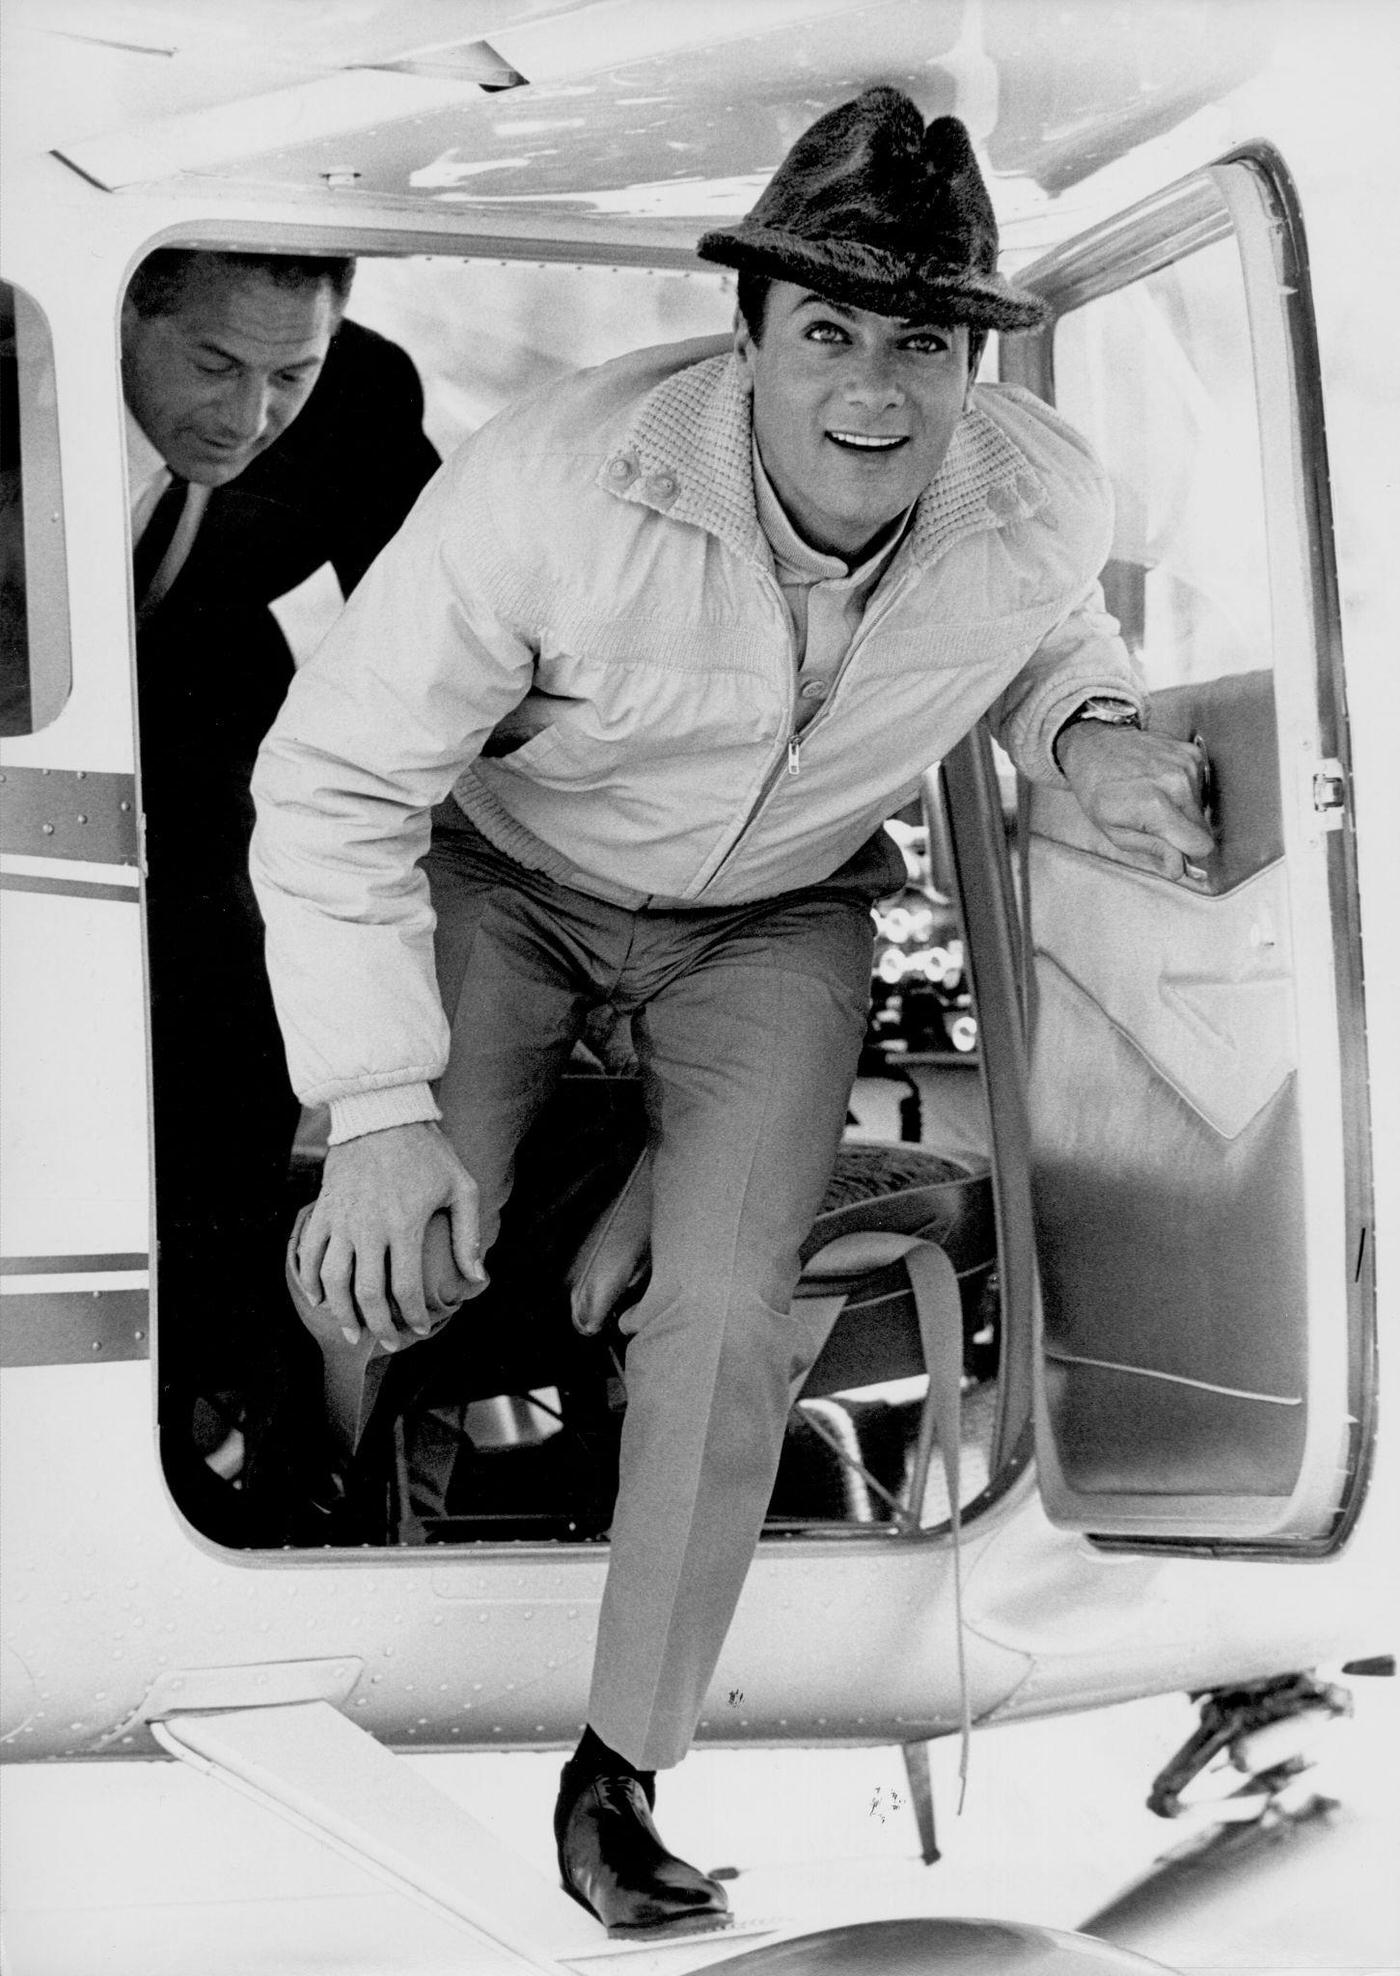 Tony Curtis Exits Plane in Nevada While Filming "40 Pounds of Trouble," 1961